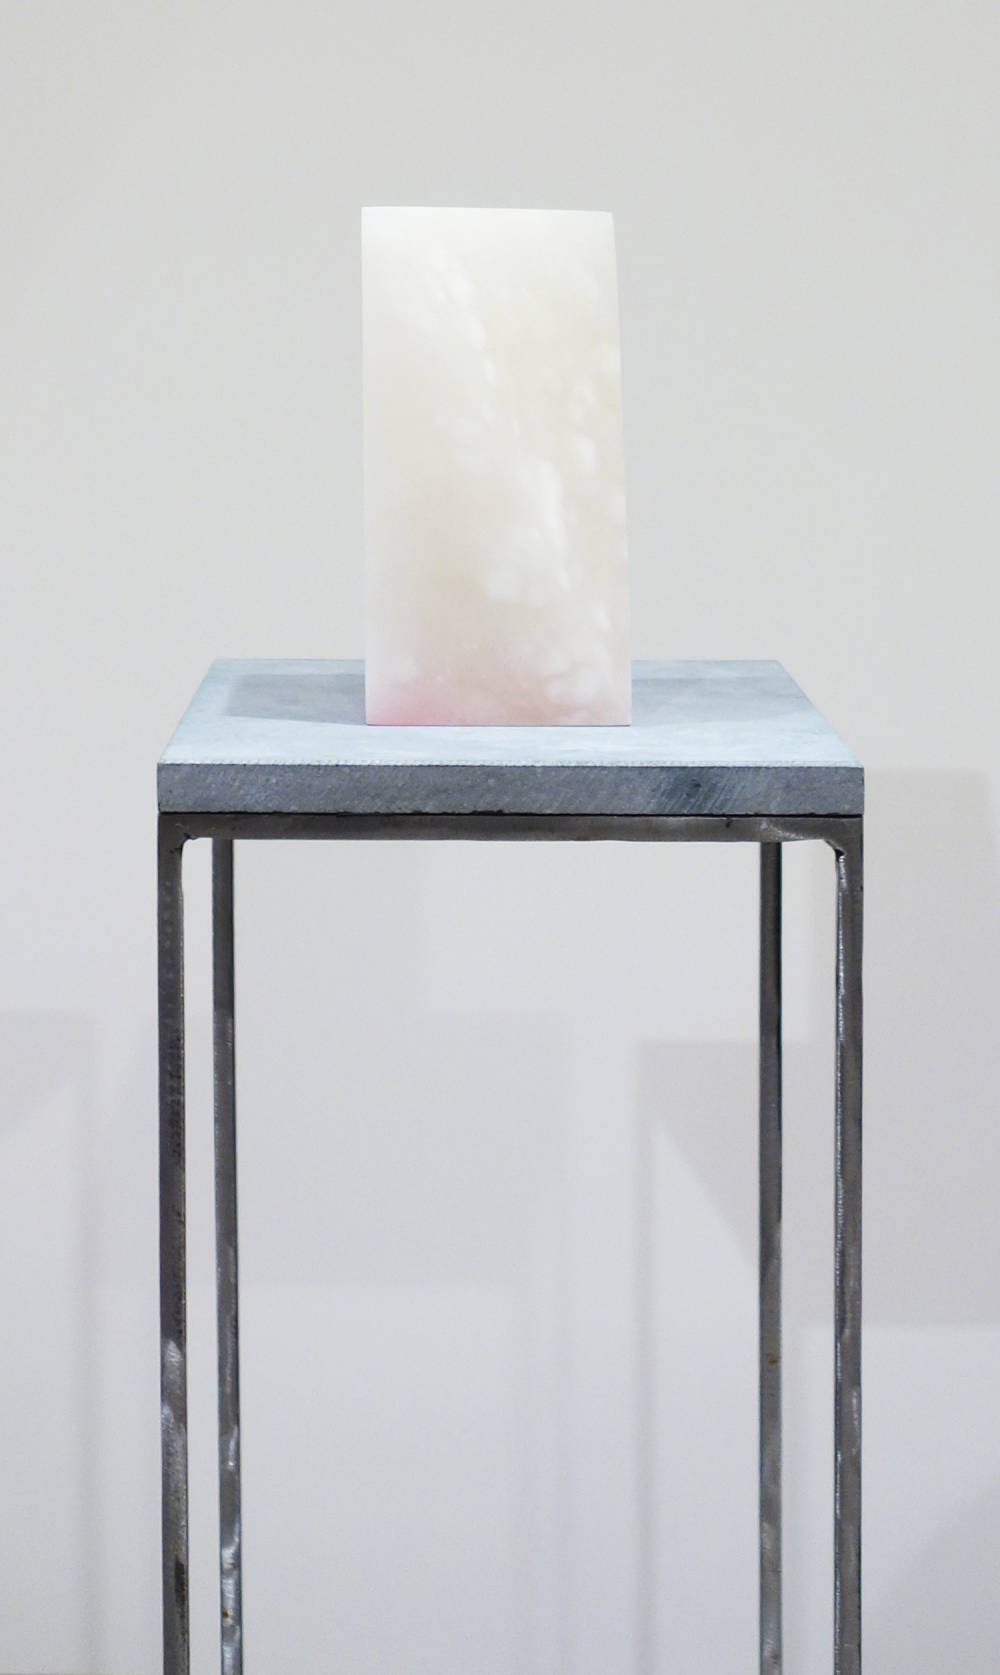 Atop a blue stone and steel plinth sits a rectangular block of white alabaster. There is a triangular piece of the alabaster cut from the block, and on the bottom is a gradient of pink acrylic paint.